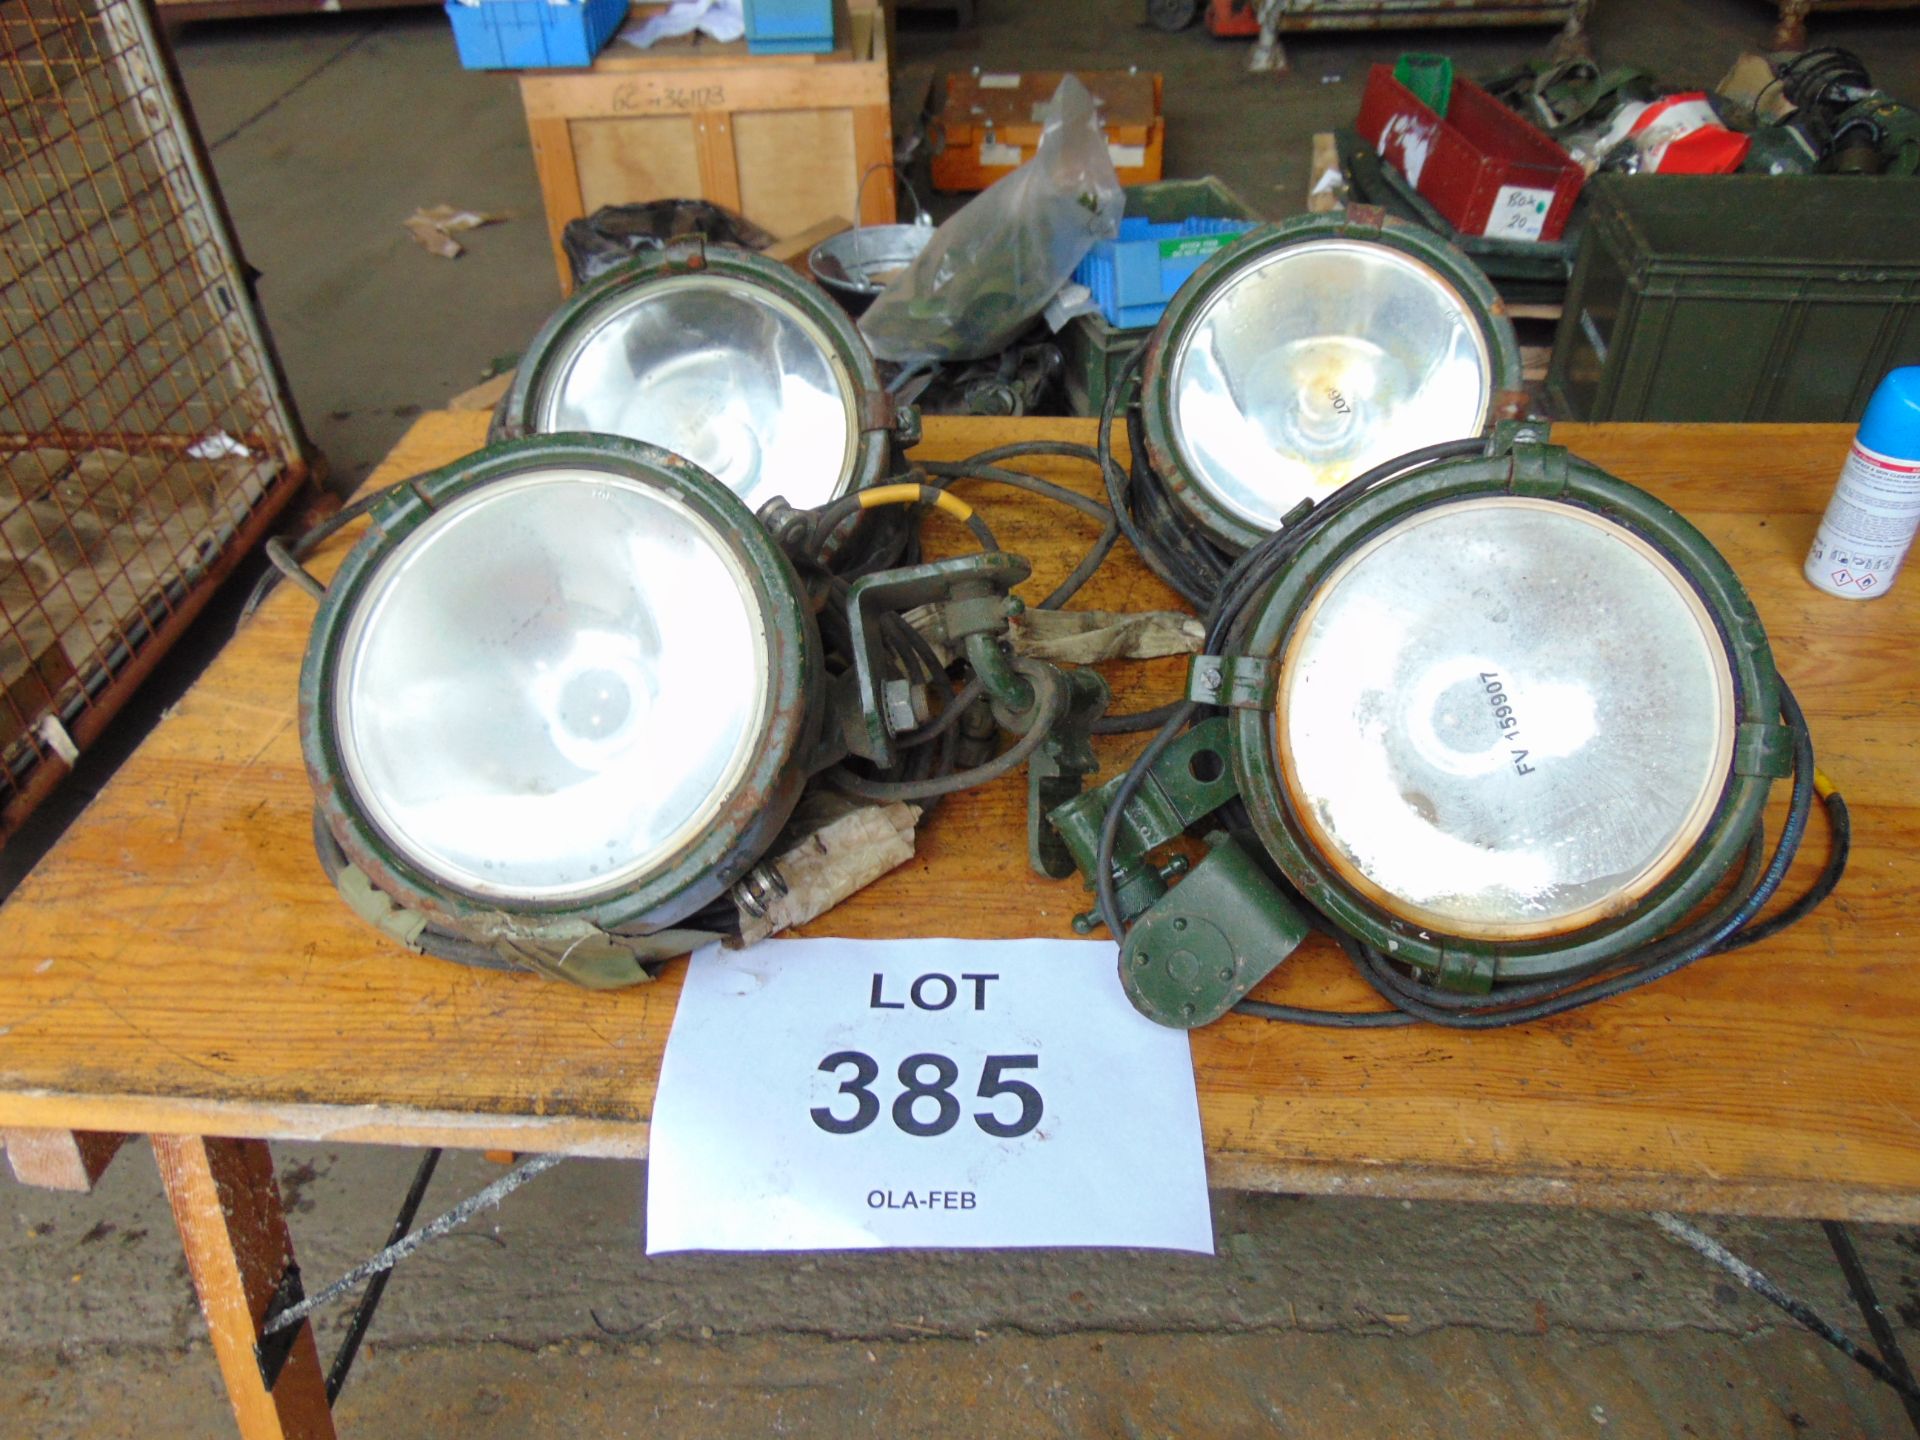 4 x FV159907 Vehicle Spot Lamp c/w Bracket and Leads - Image 4 of 4